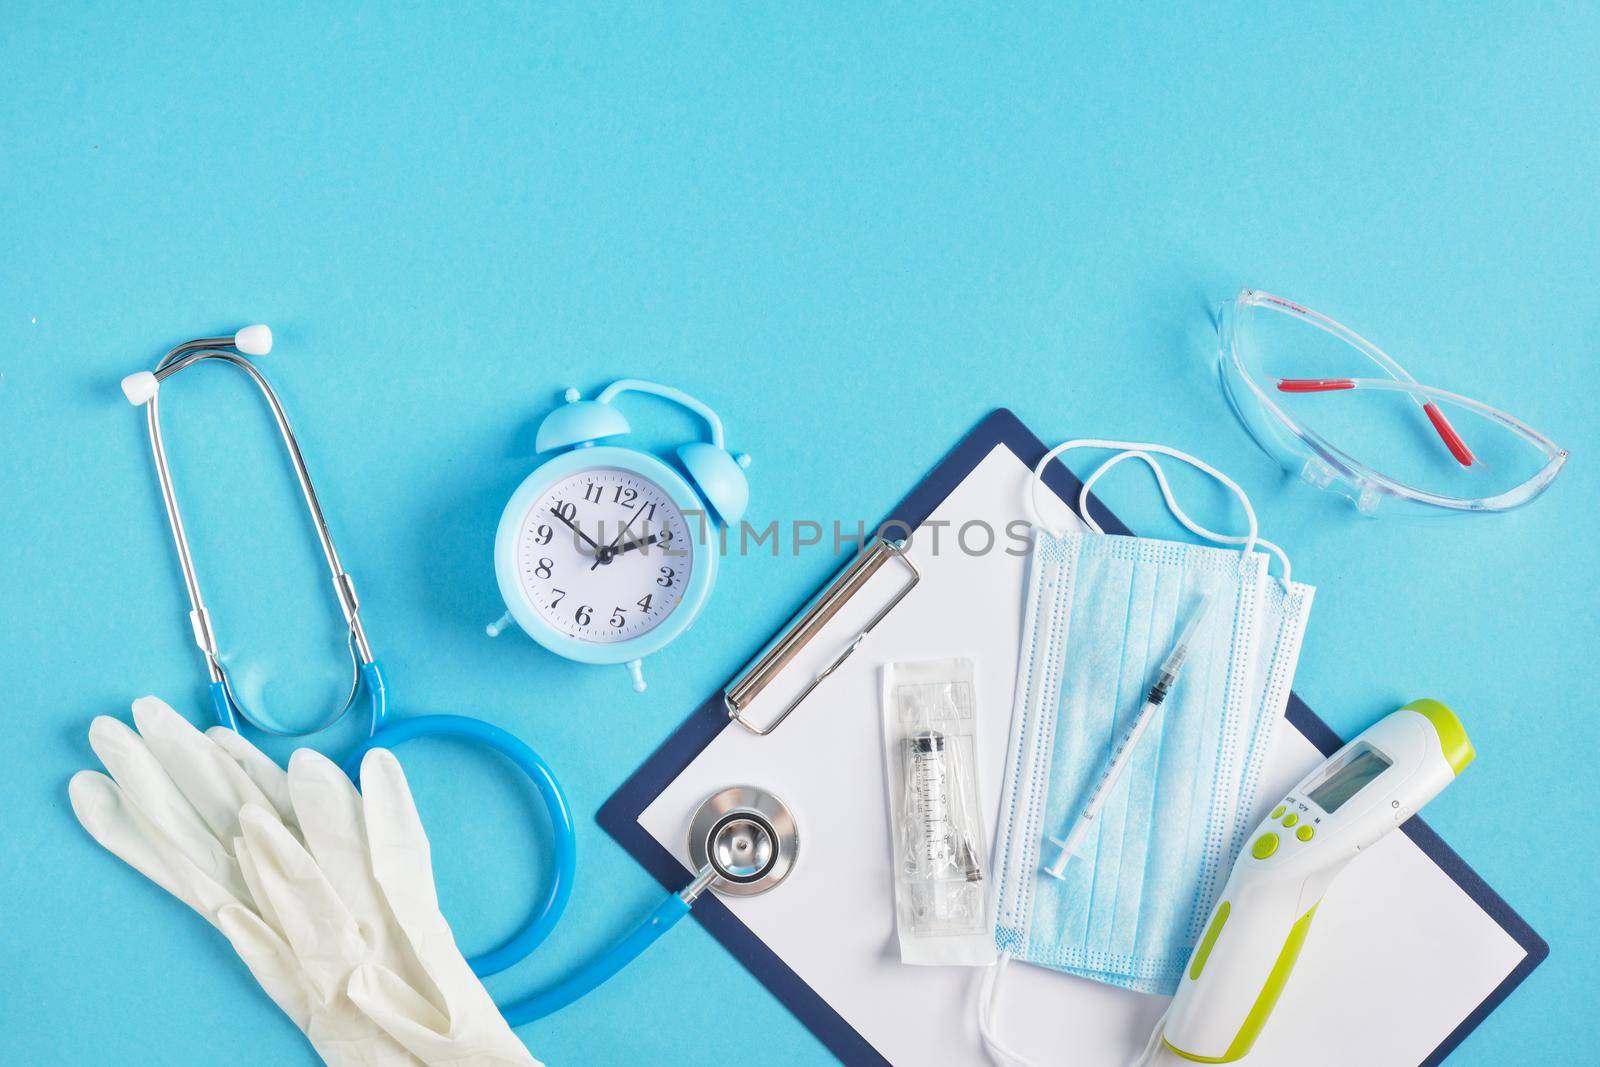 Alarm clock and medical equipment on a blue background place copy top view stethoscope non-contact thermometer face mask syringe safety glasses and gloves